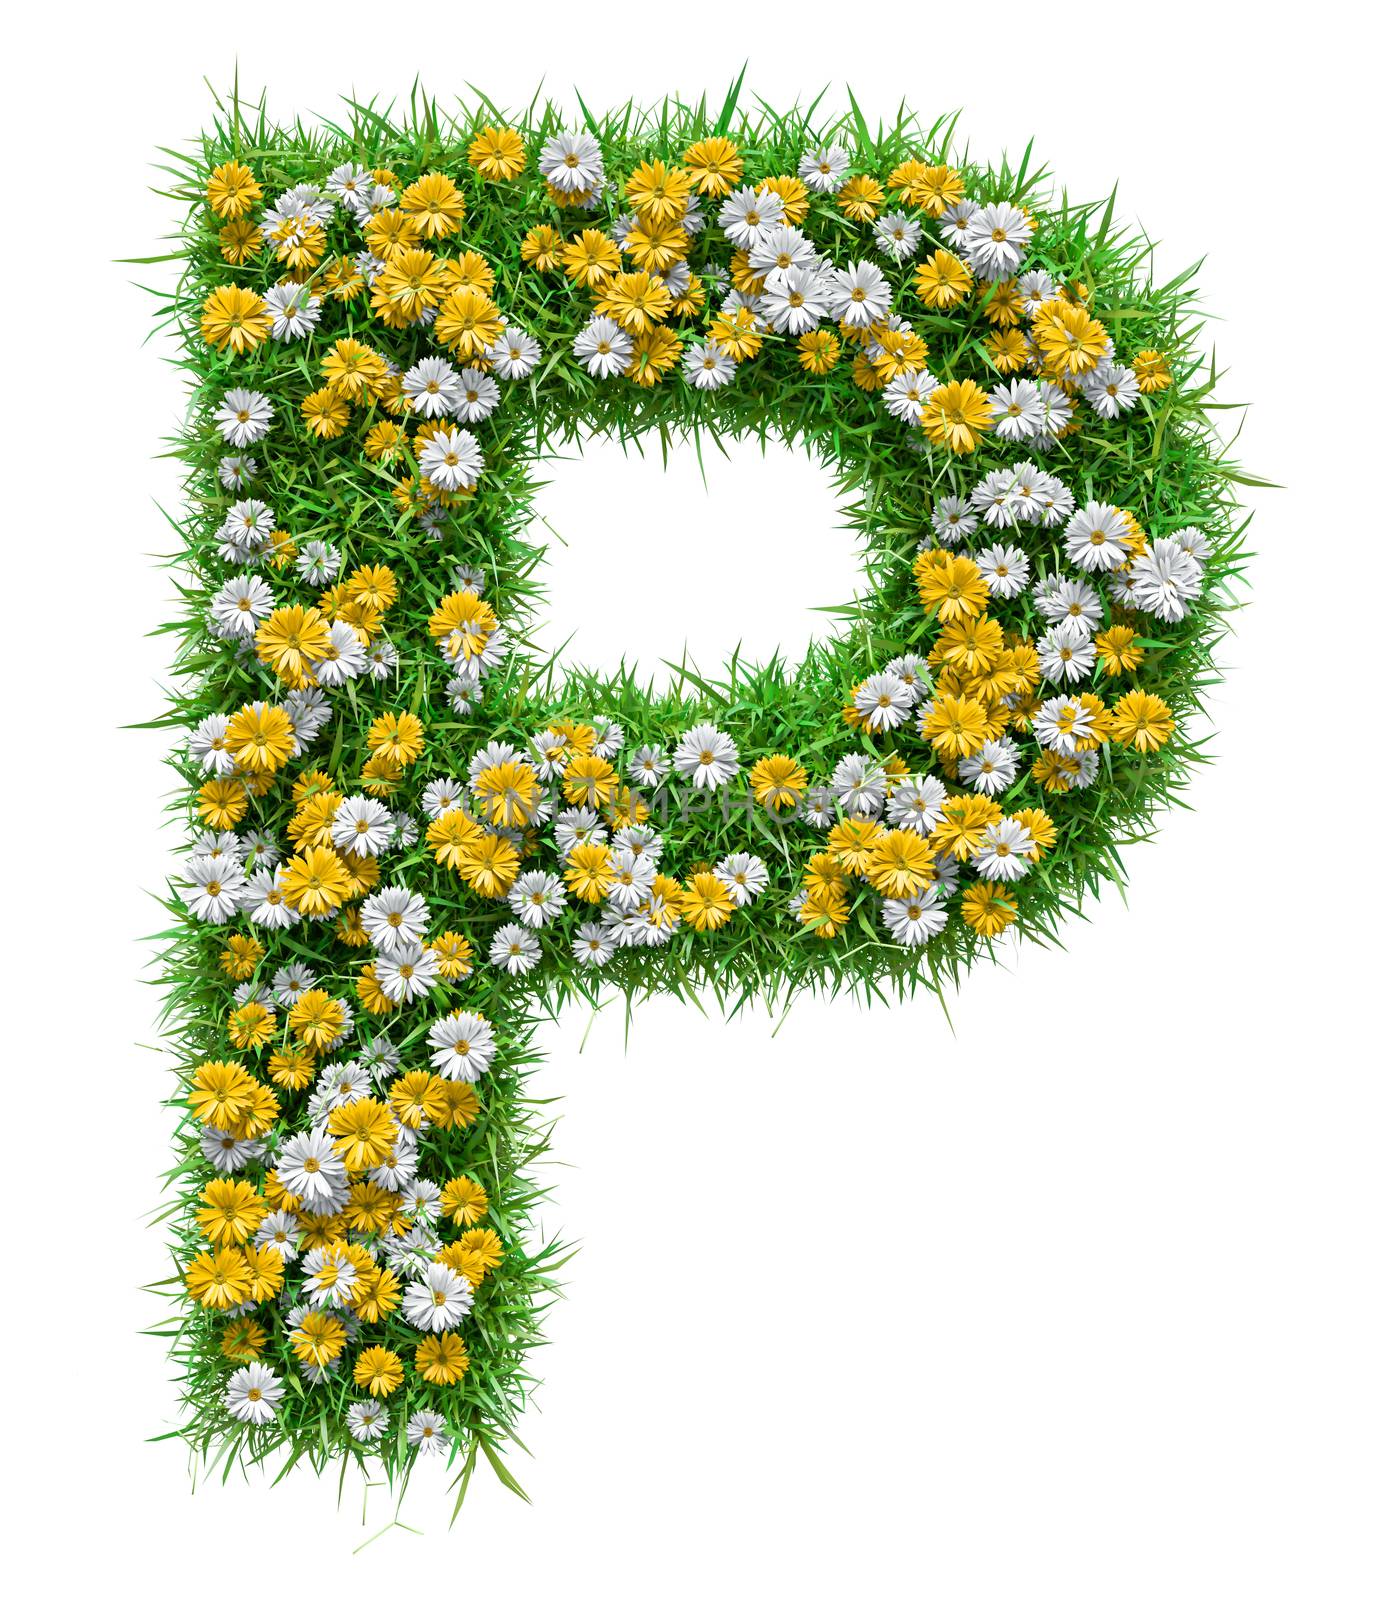 Letter P Of Green Grass And Flowers. Isolated On White Background. Font For Your Design. 3D Illustration